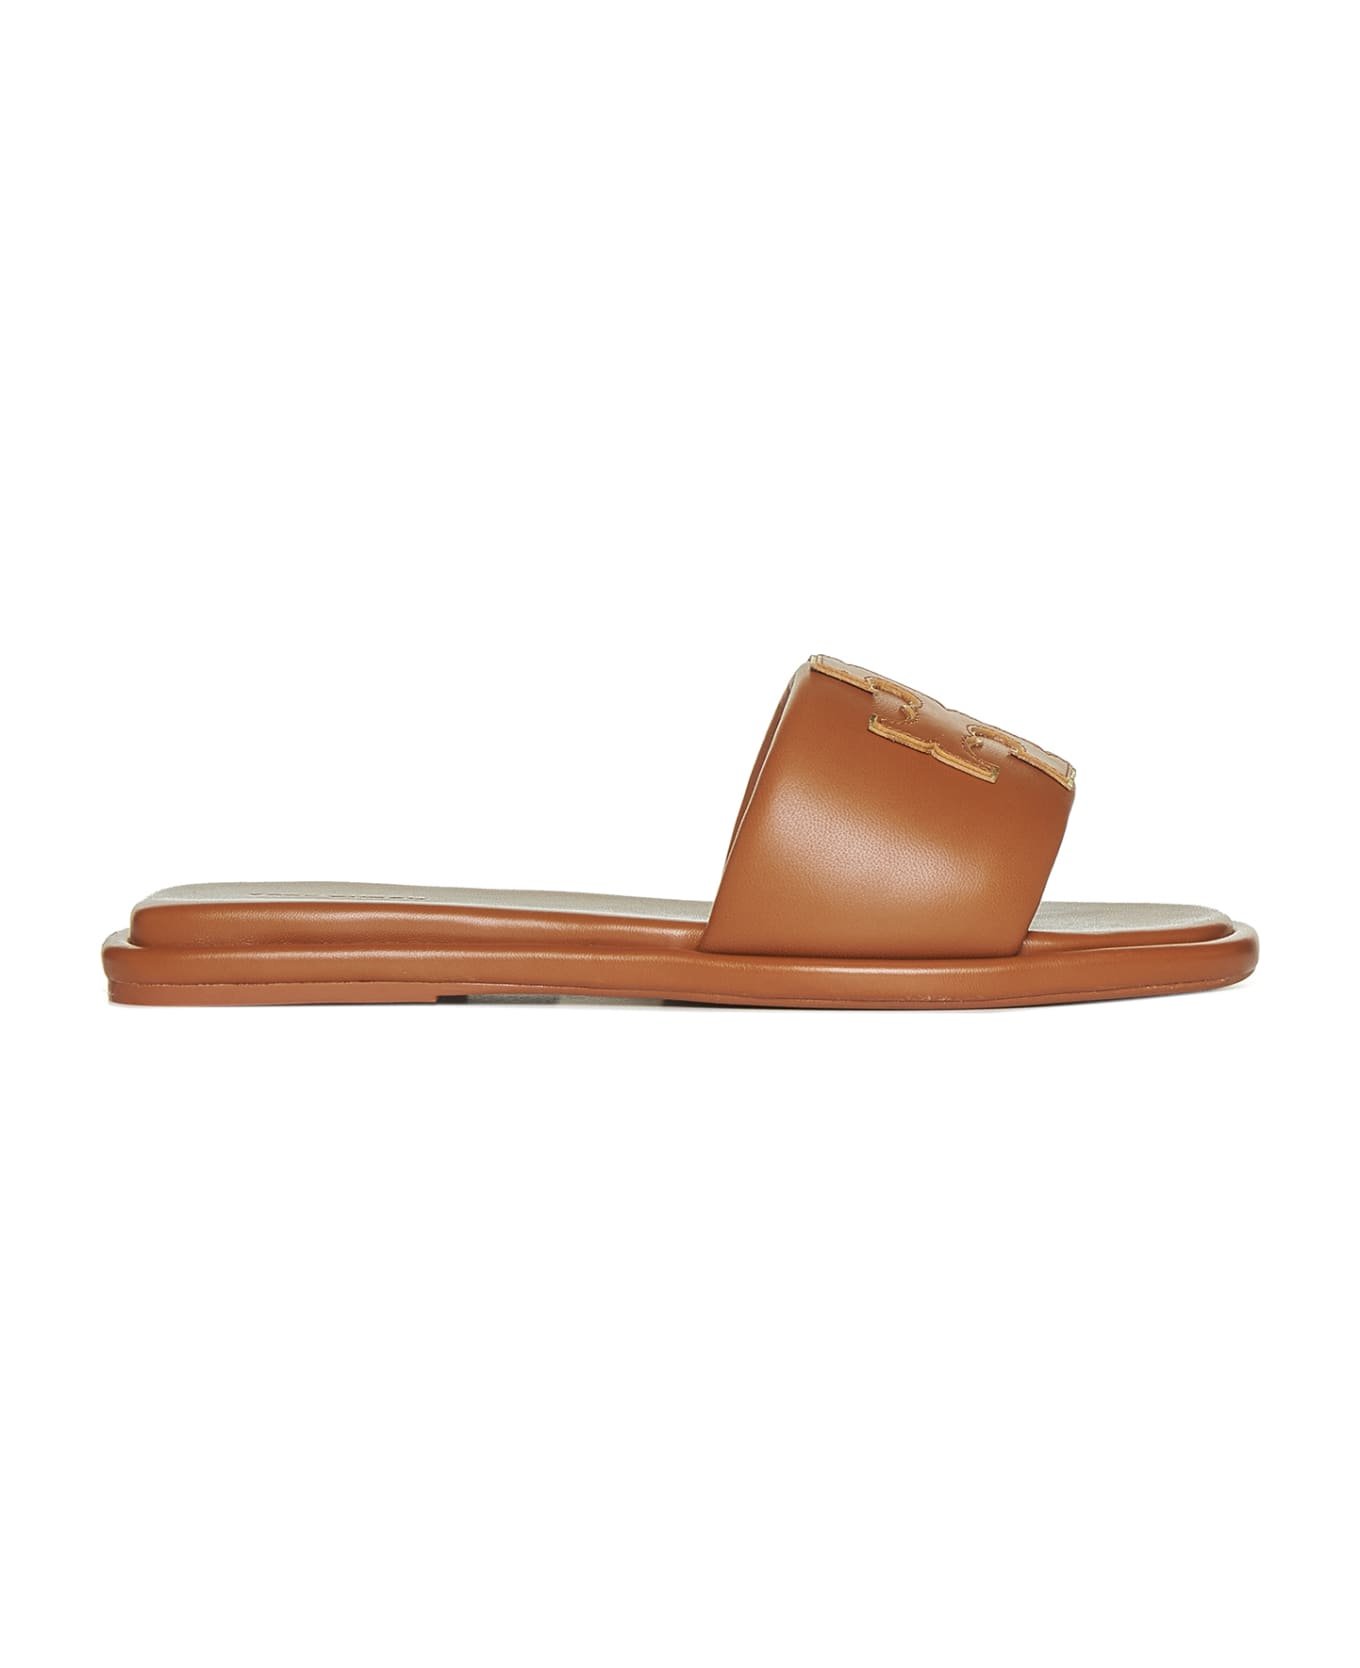 Tory Burch Double T Leather Slides - Brown サンダル